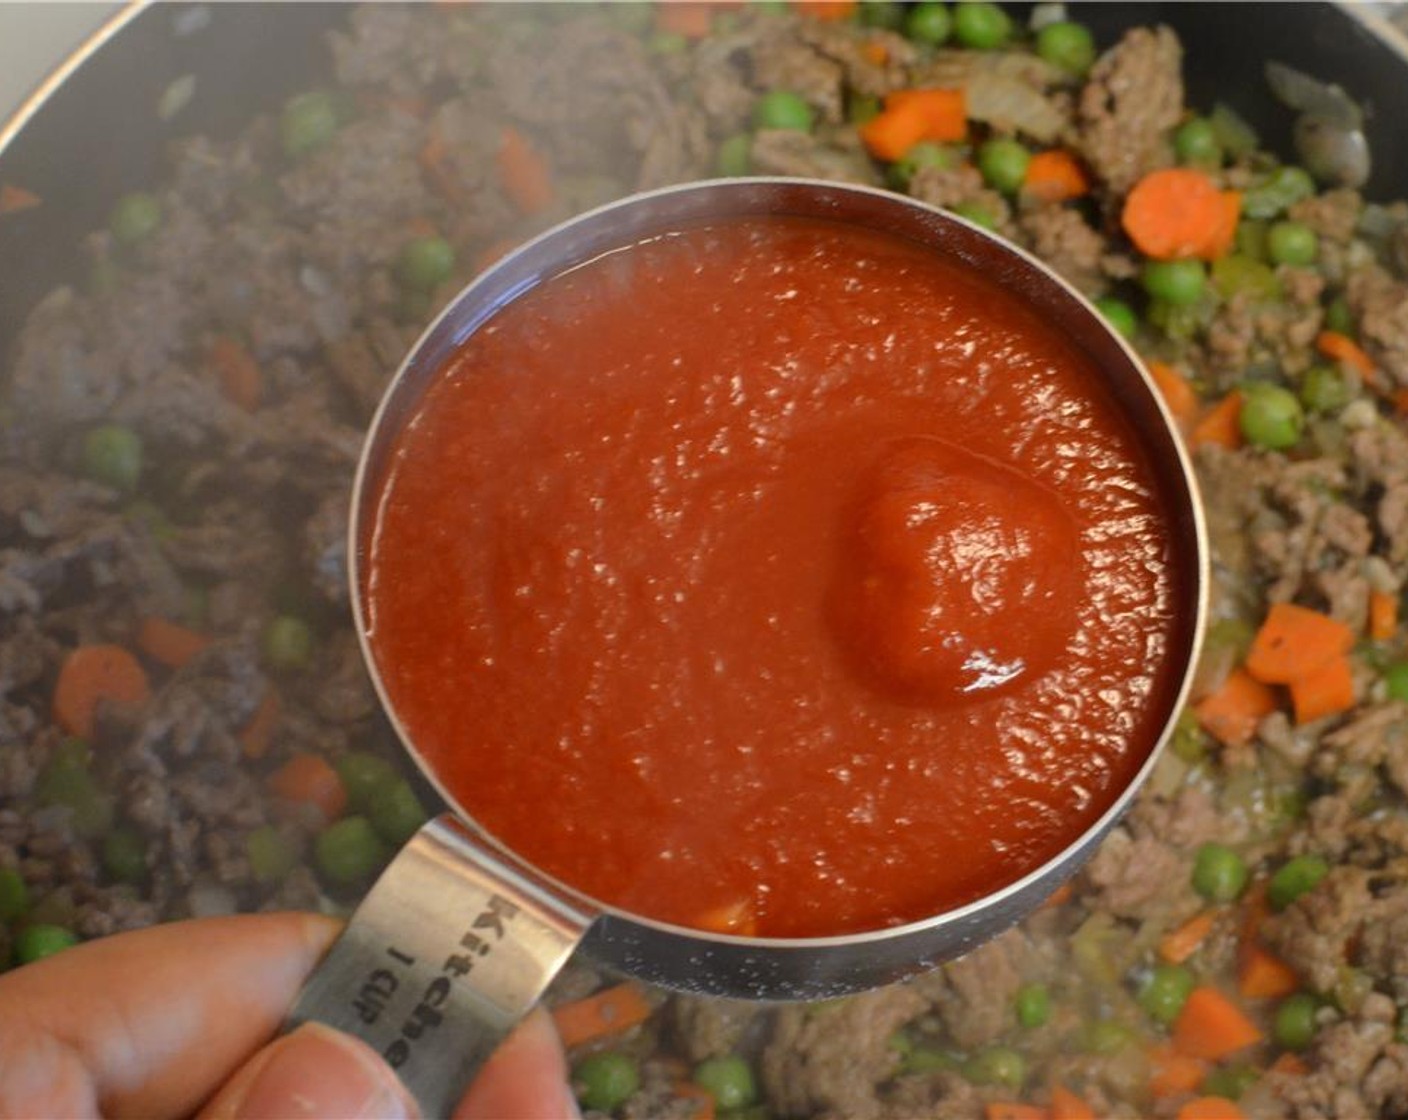 step 7 Then pour in Tomato Sauce (1 cup) mix well and bring to a boil. Then put a lid on, lower the heat and let the sauce simmer for 10 minutes. Just before you turn off the heat, stir in some finely chopped Fresh Parsley (1 handful).